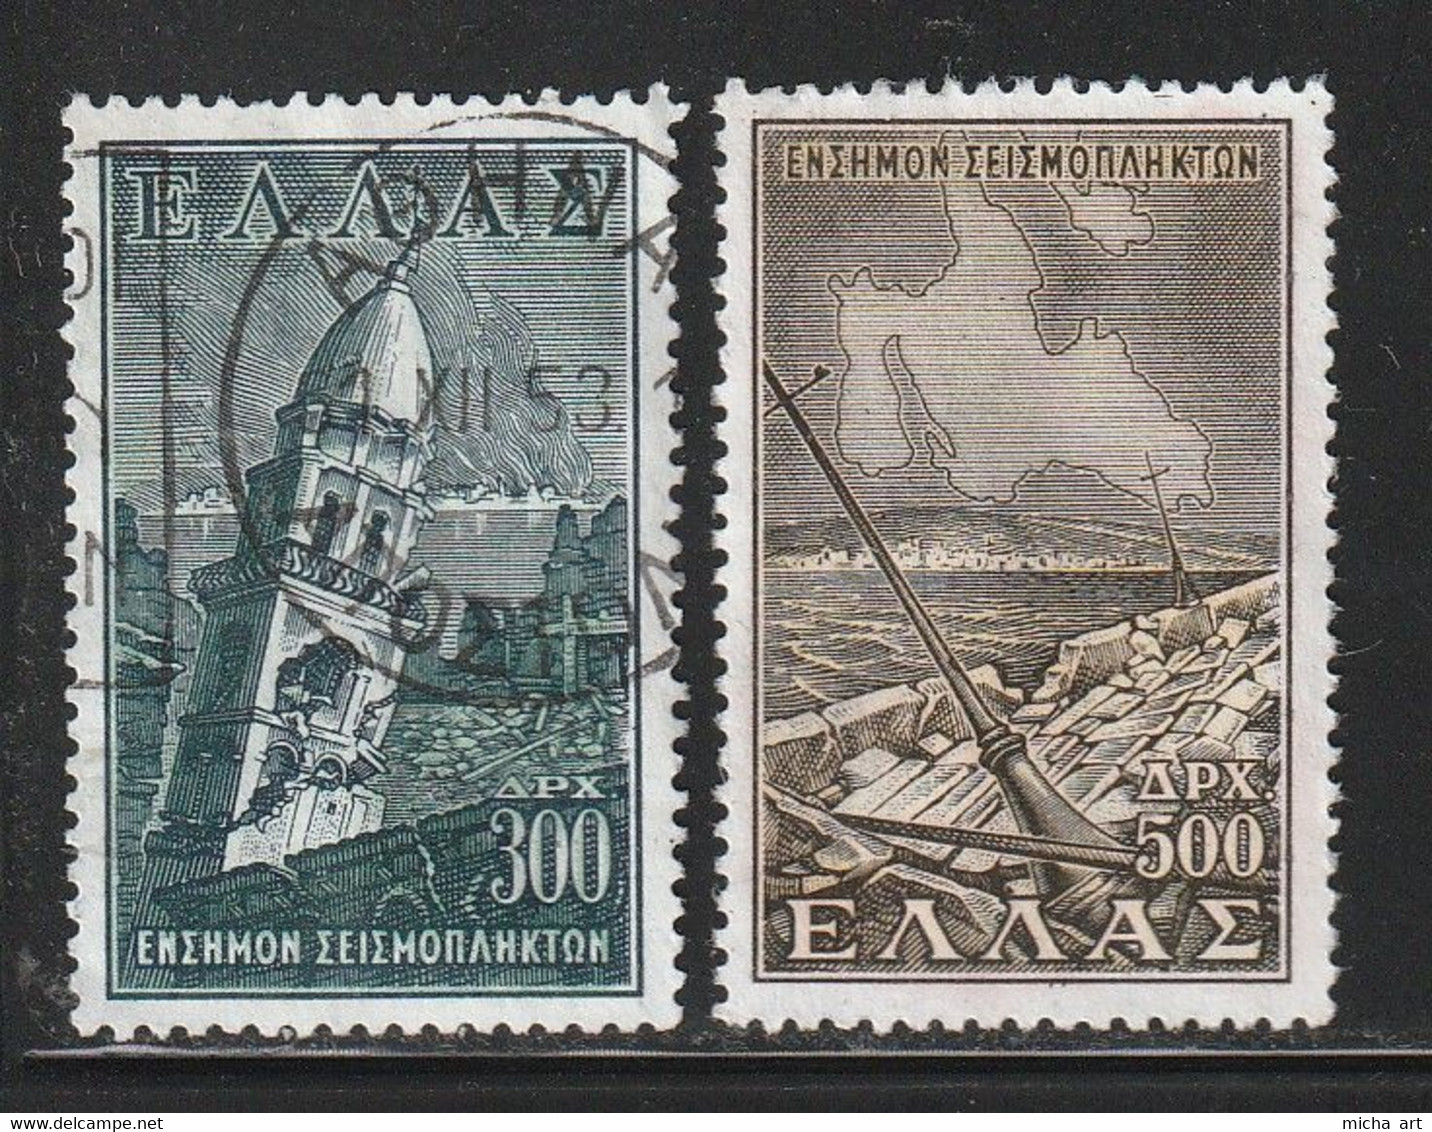 Greece 1953 Ionian Islands Earthquake Fund - Charity Issue Set Used W0891 - Charity Issues